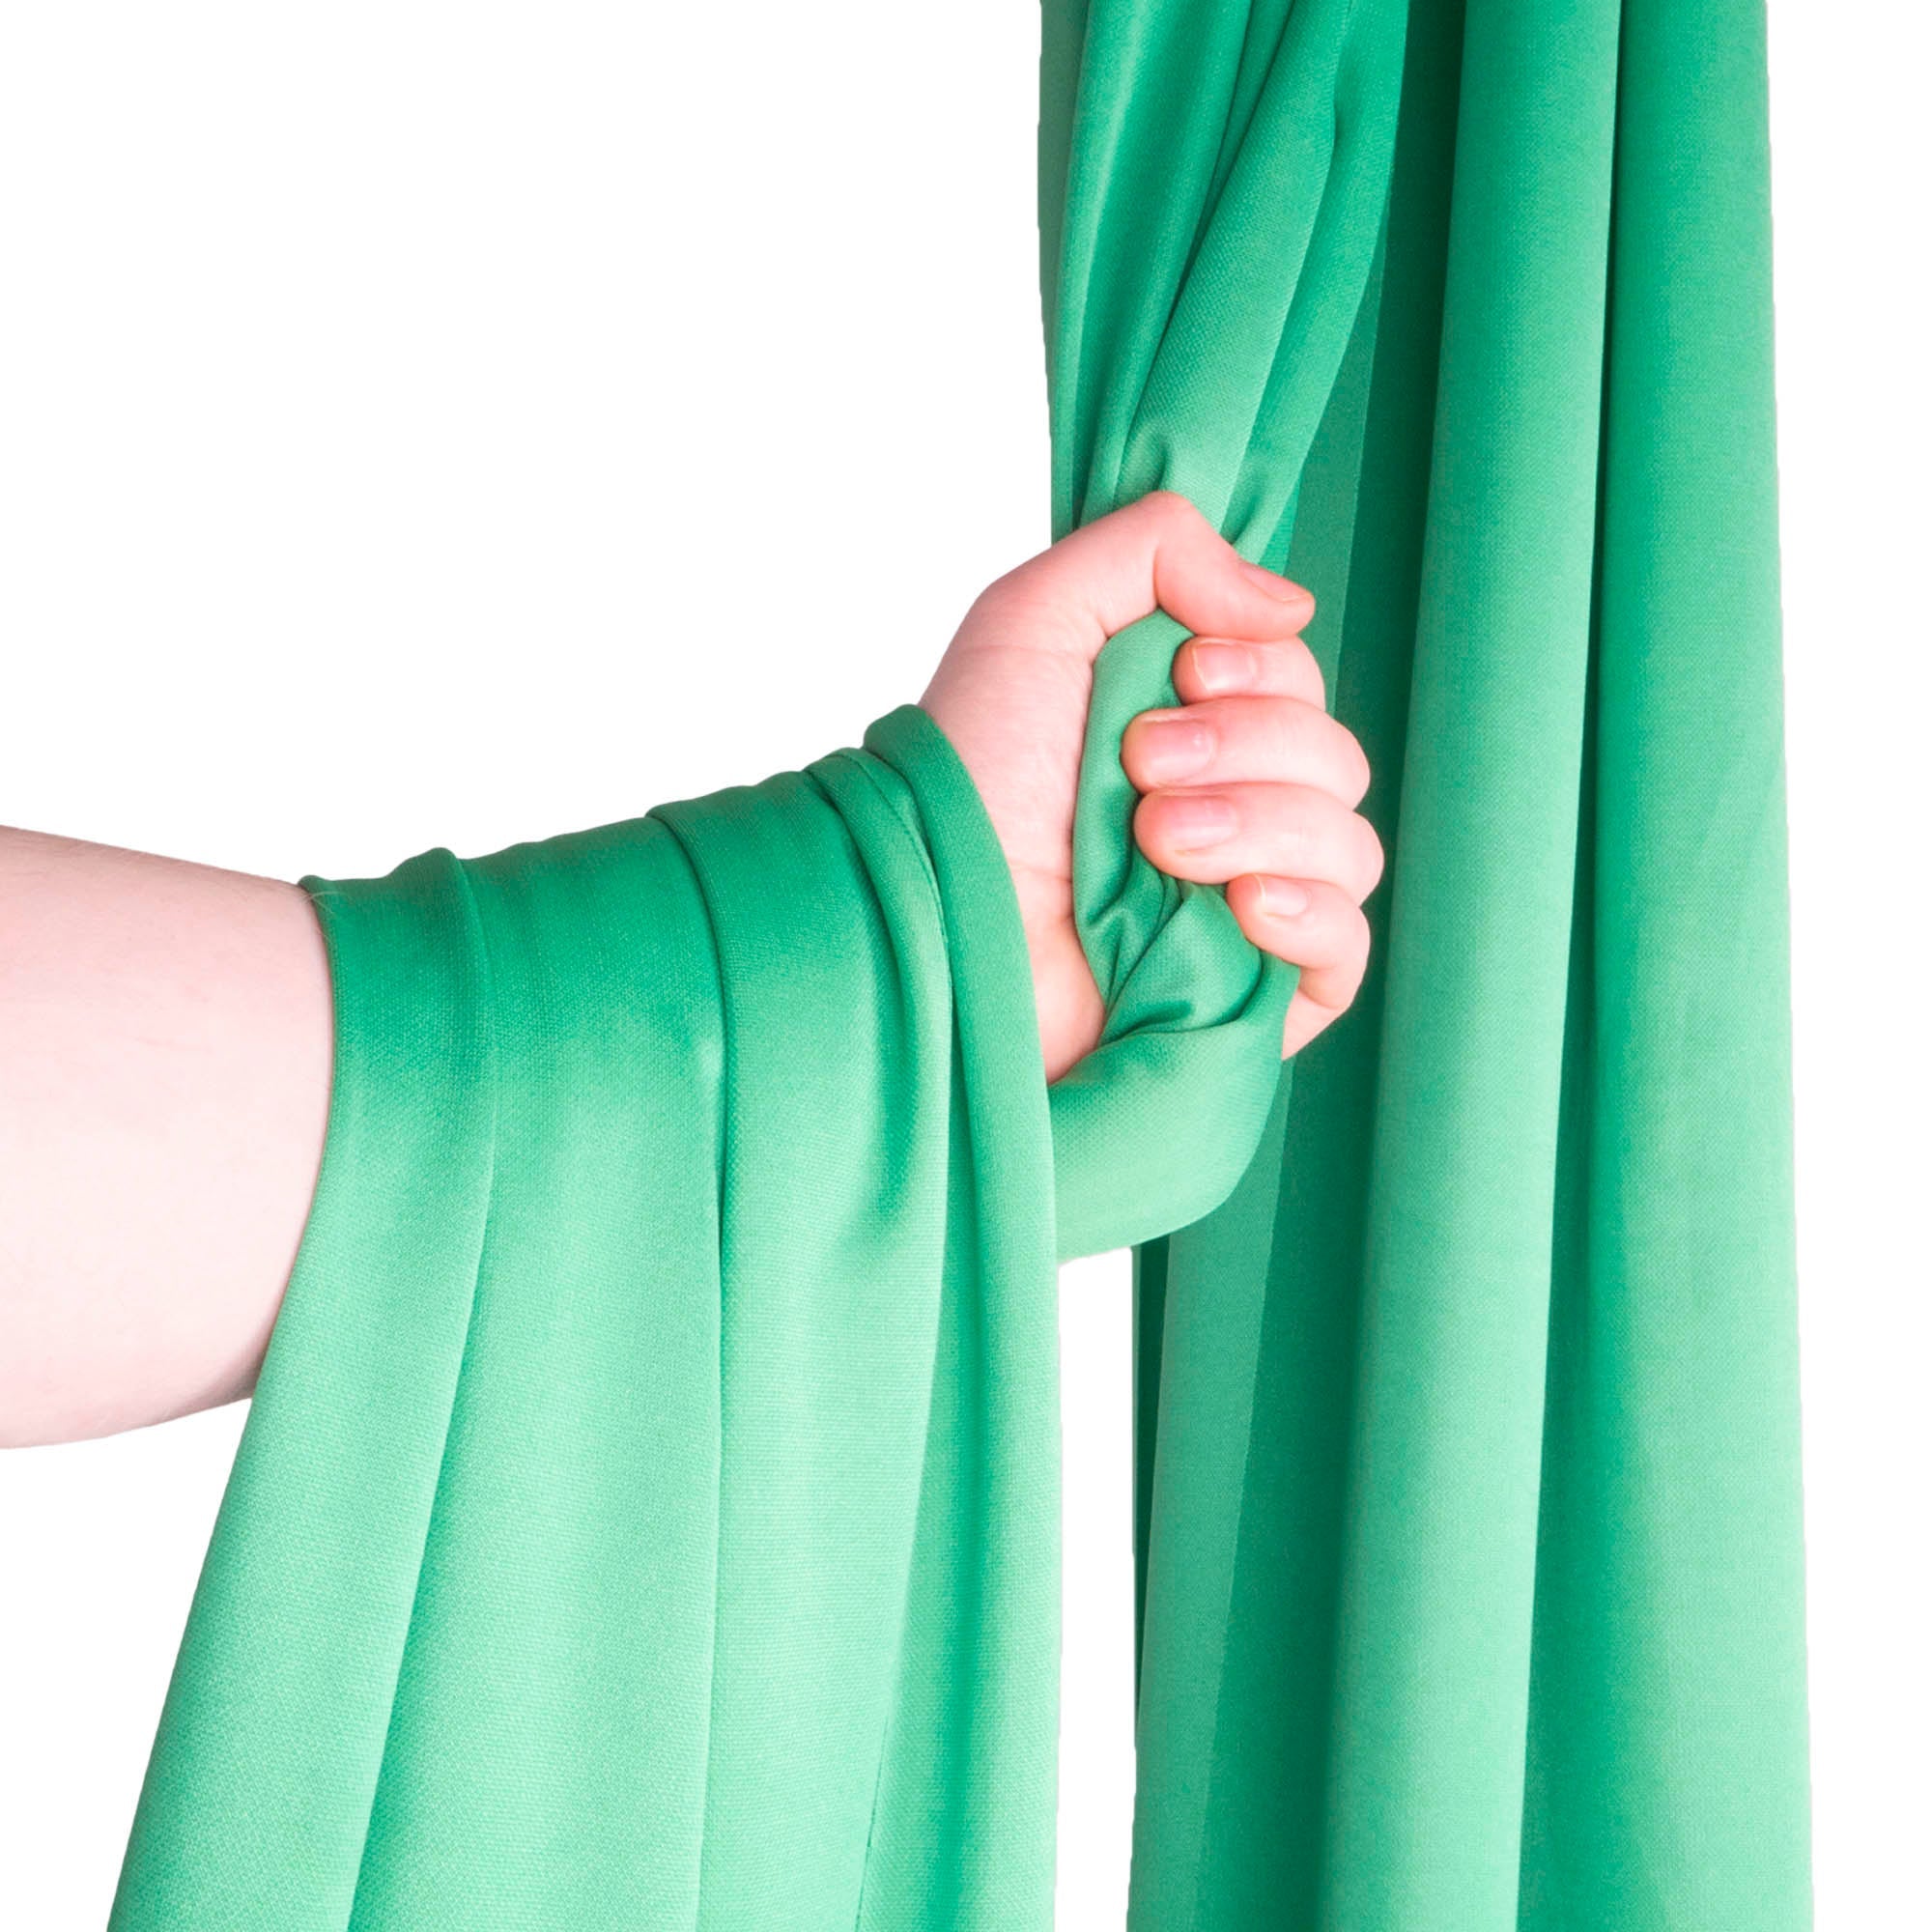 Firetoys youth aerial silk kelly green wrapped over hand